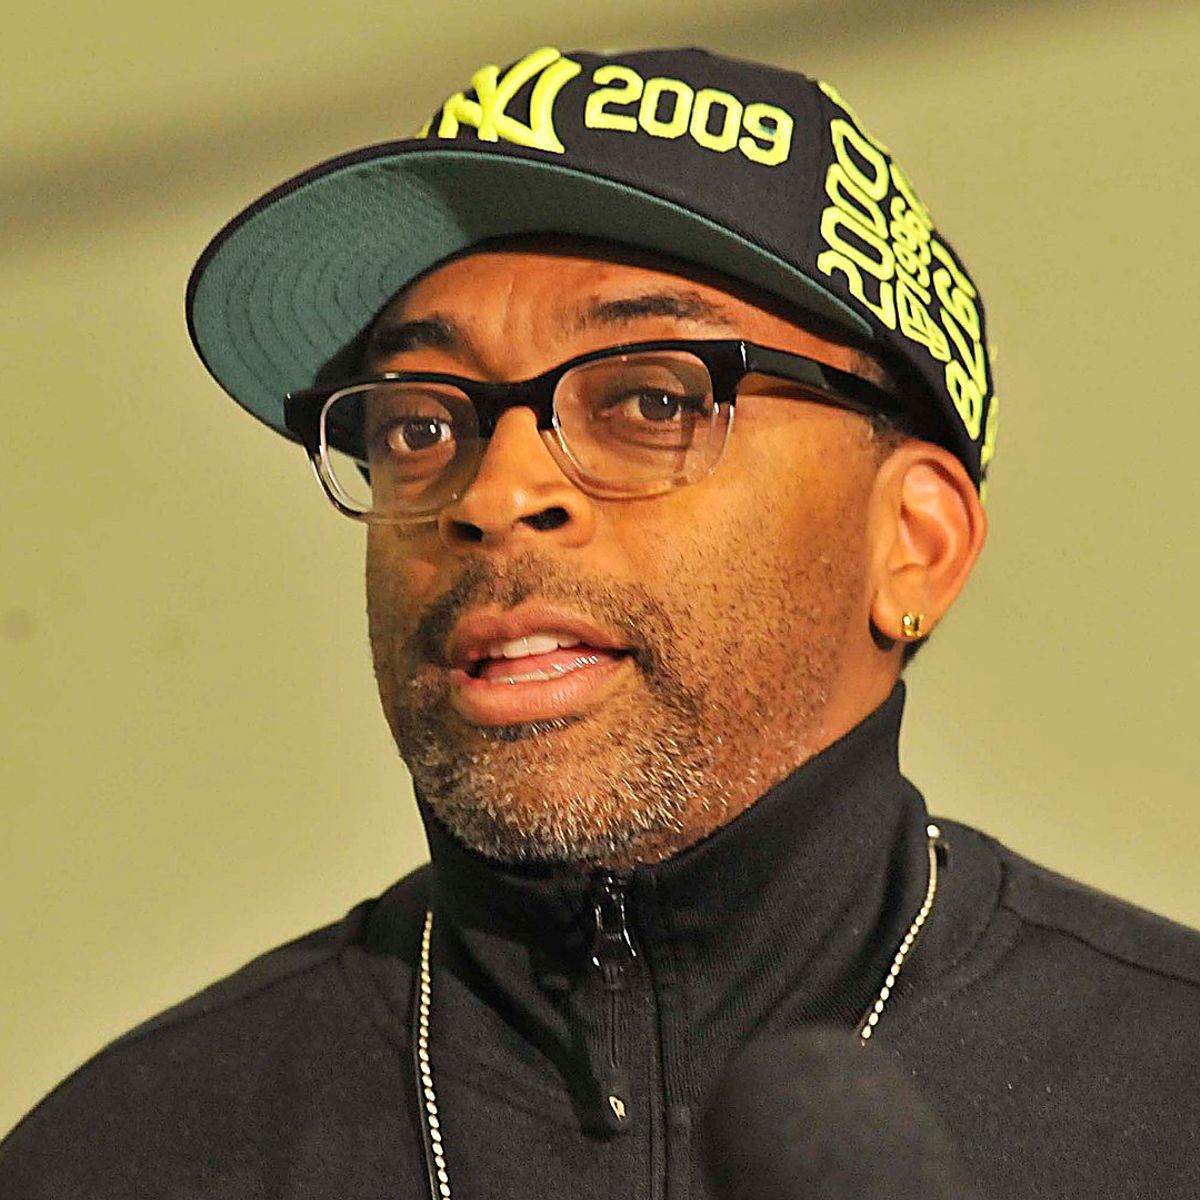 Spike Lee Re-Edits Documentary Series on 9/11 After 'Truther